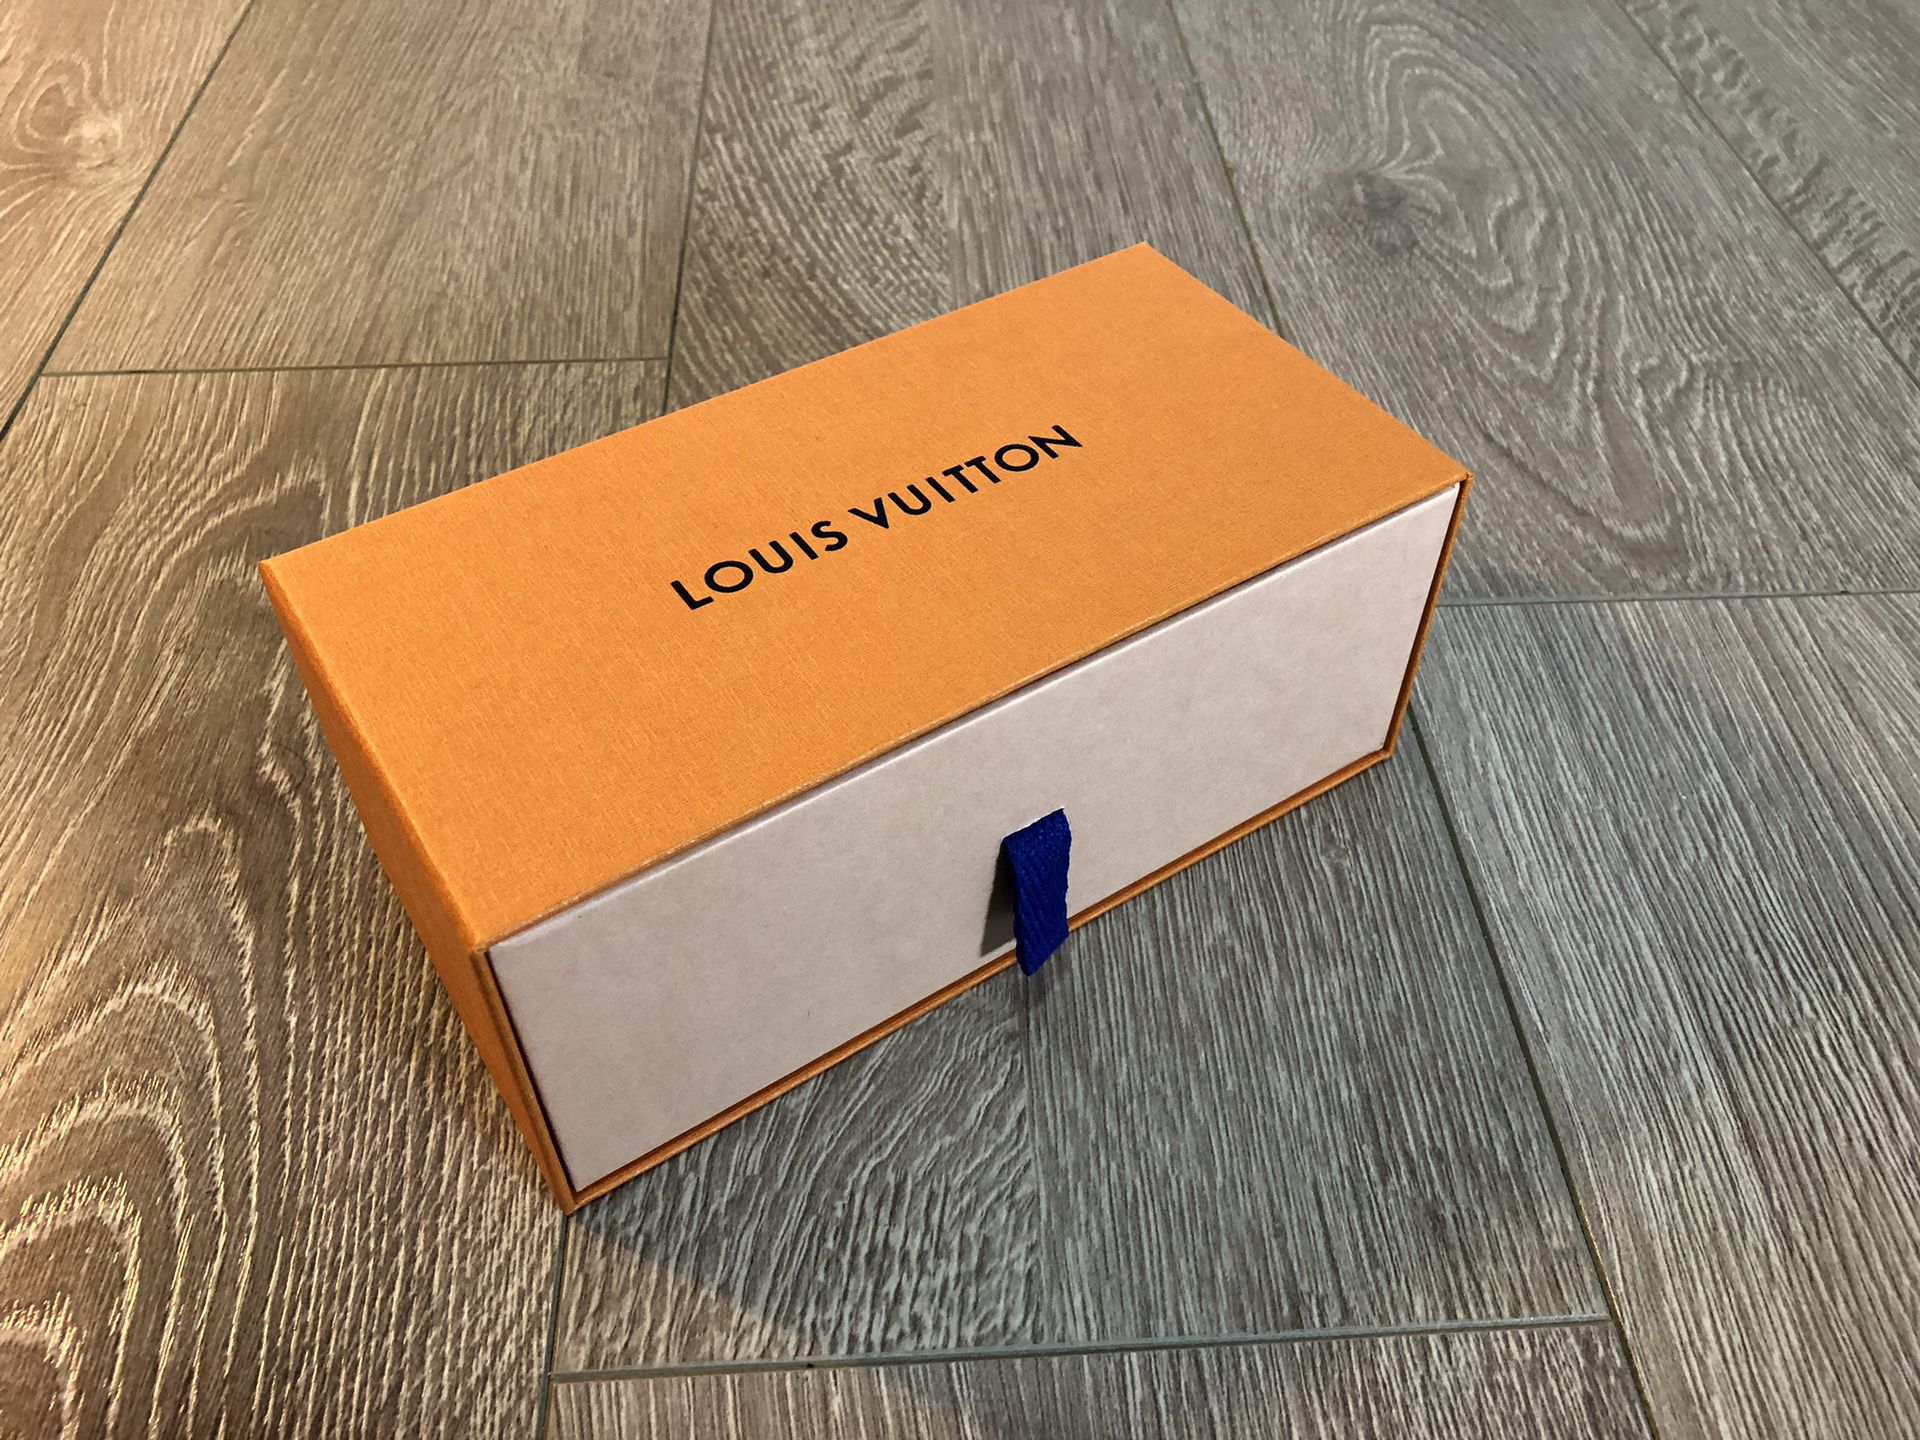 Louis Vuitton boxes for Sale in Linden, NJ - OfferUp